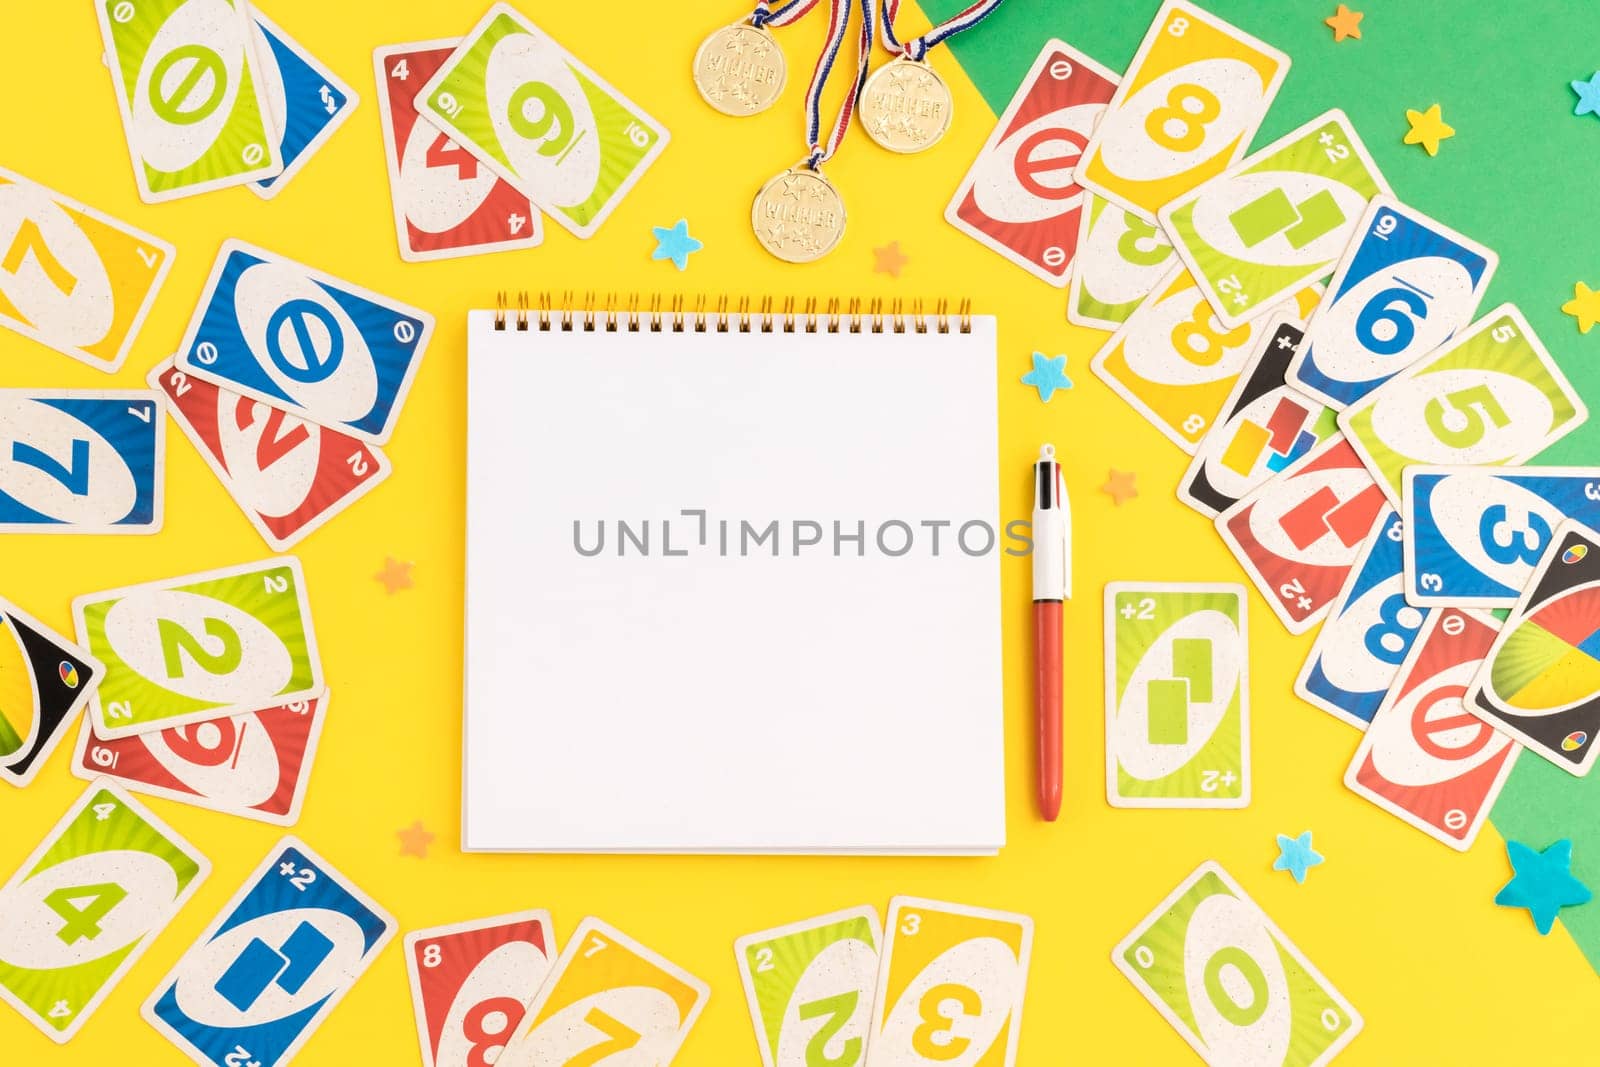 Old, dirty uno cards, winner medals, an empty notepad and stars on a green-yellow background. by Nataliya